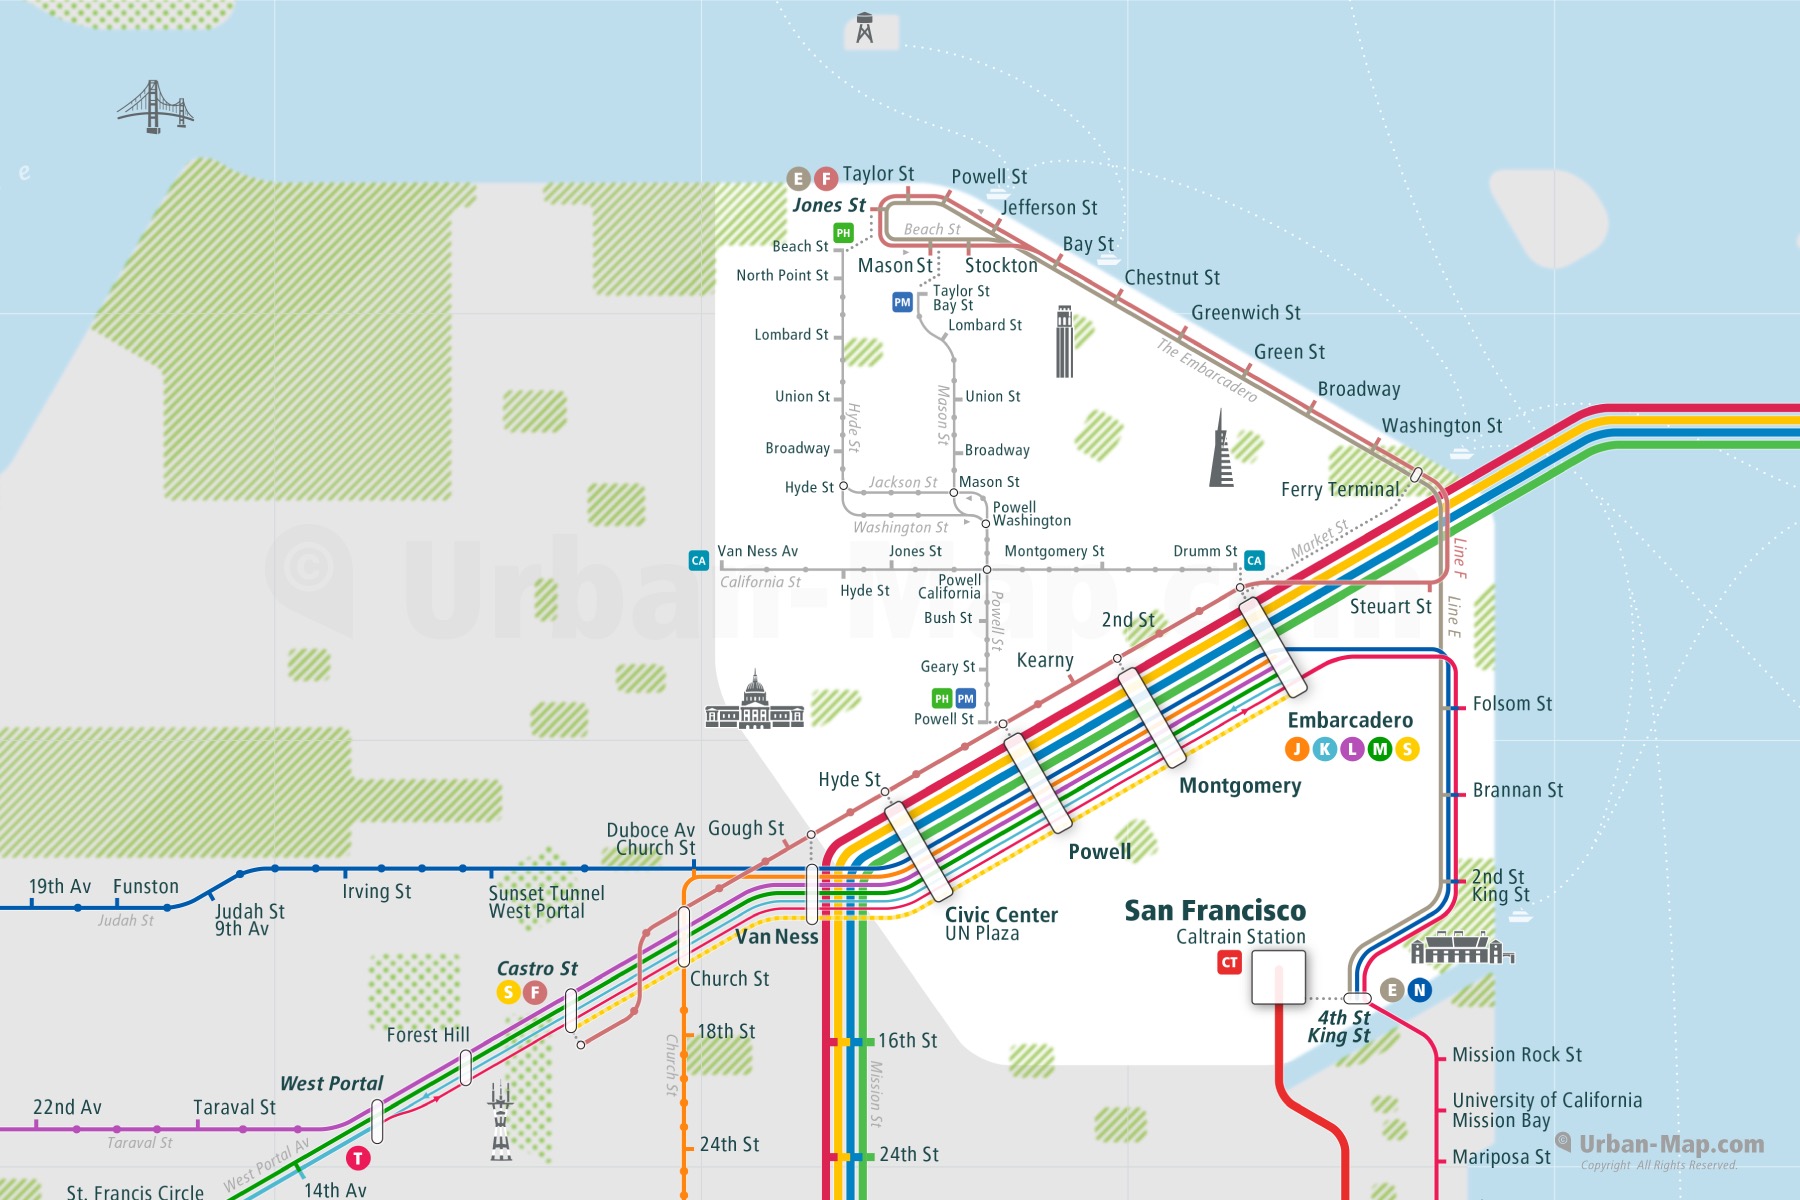 San Francisco City Rail Map shows the train and public transportation routes of - Close-Up